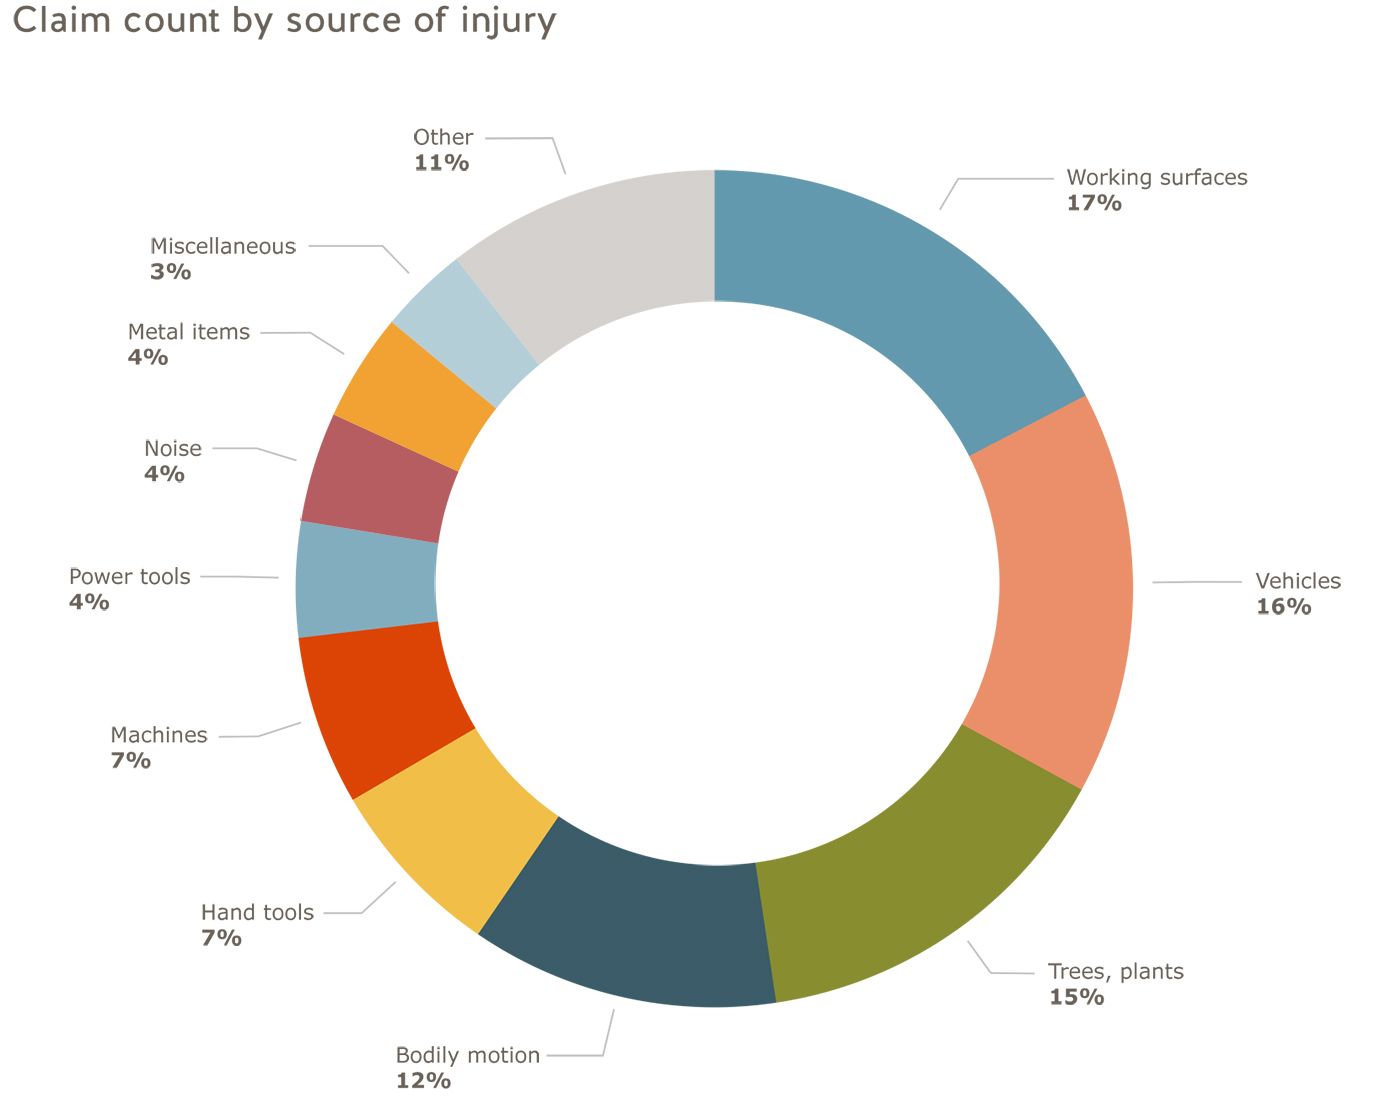 Forestry sector claim count by source of injury: working surfaces=17%; vehicles=16%; trees, plants=15%; bodily motion=12%; hand tools=7%; machines=7%; power tools=4%; noise=4%; metal items=4% miscellaneous=3%; other=11%